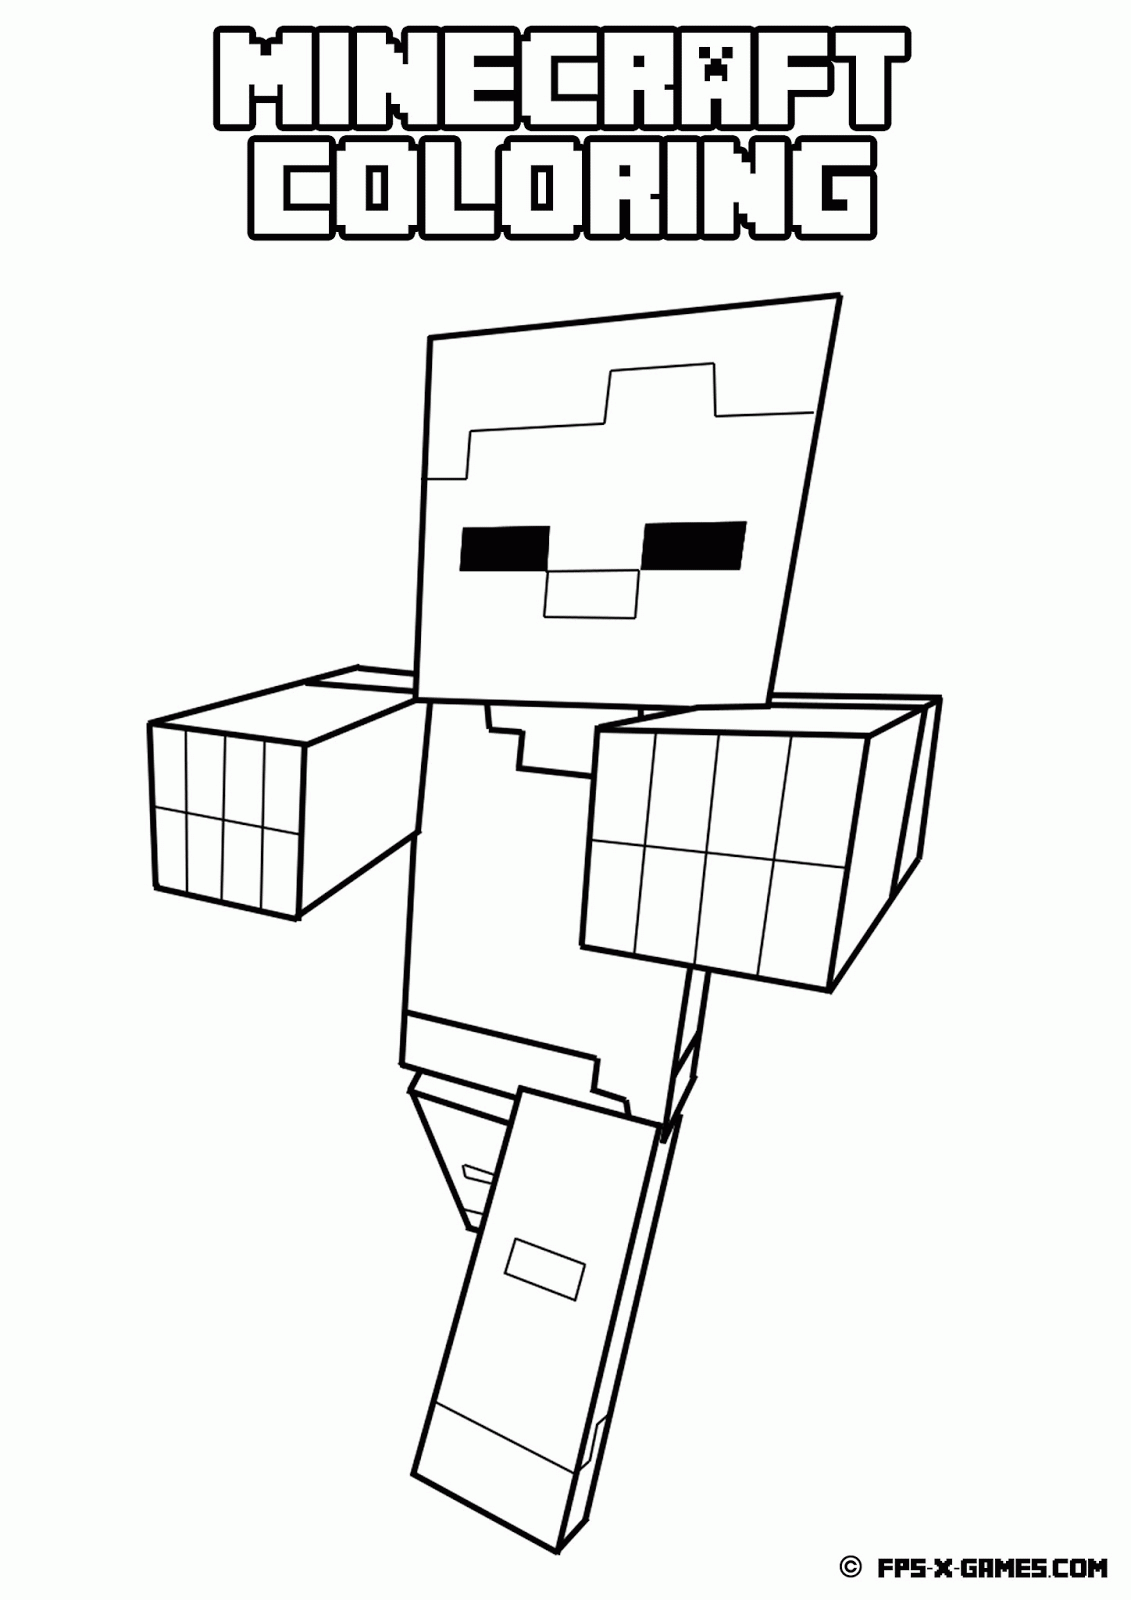 Download Or Print This Amazing Coloring Page Minecraft Coloring Pictures Minecraft Coloring Pages Minecraft Printables Minecraft Drawings